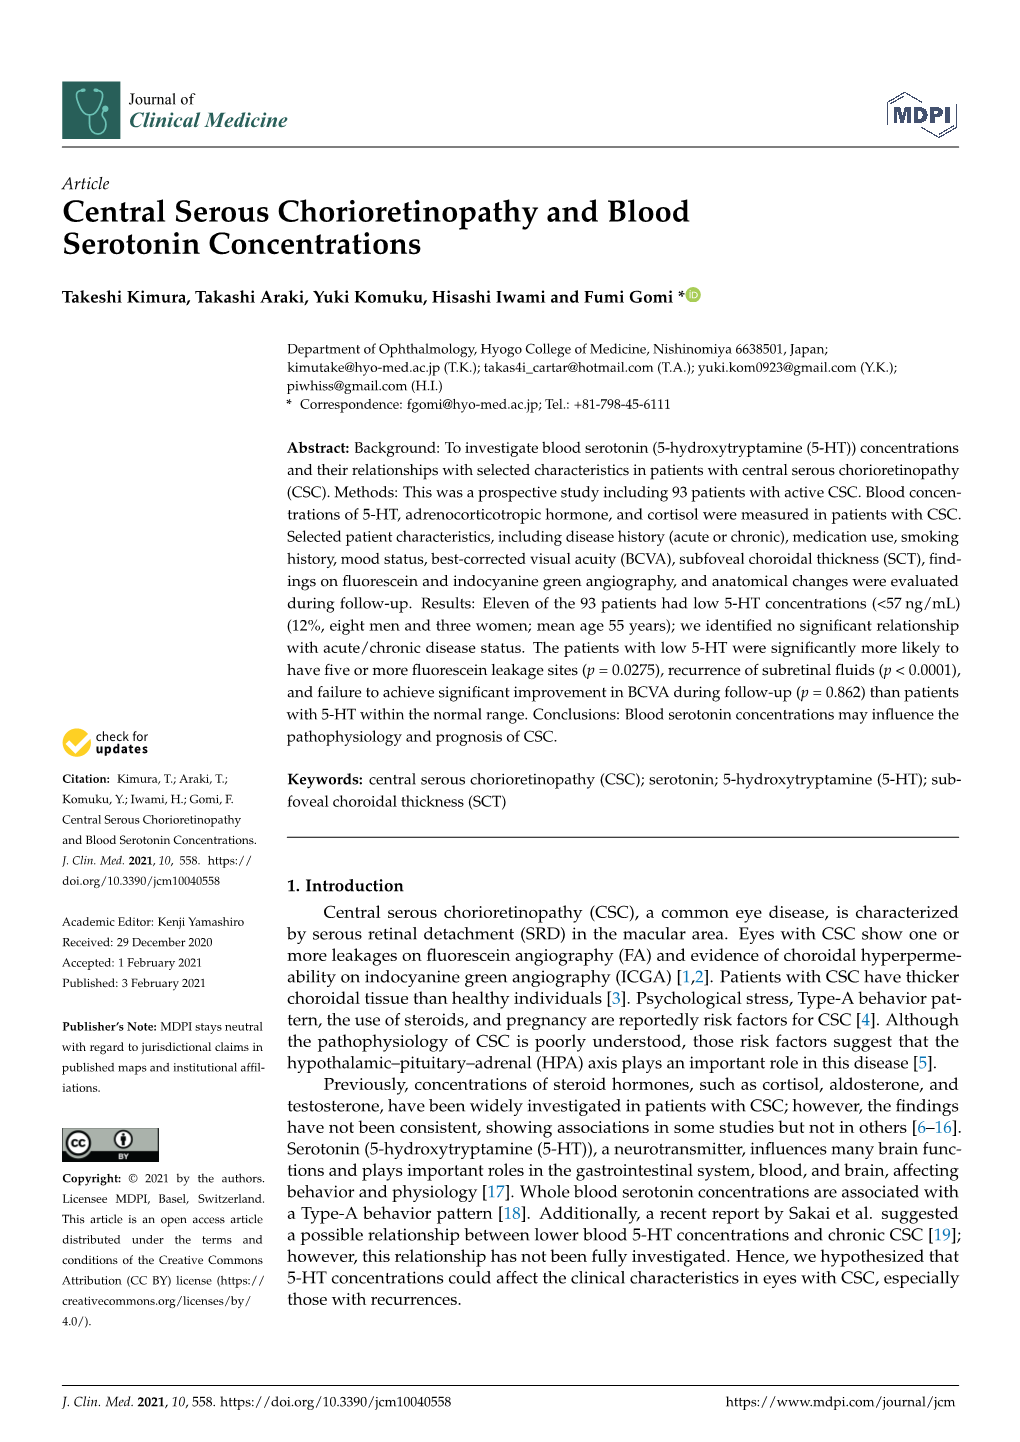 Central Serous Chorioretinopathy and Blood Serotonin Concentrations